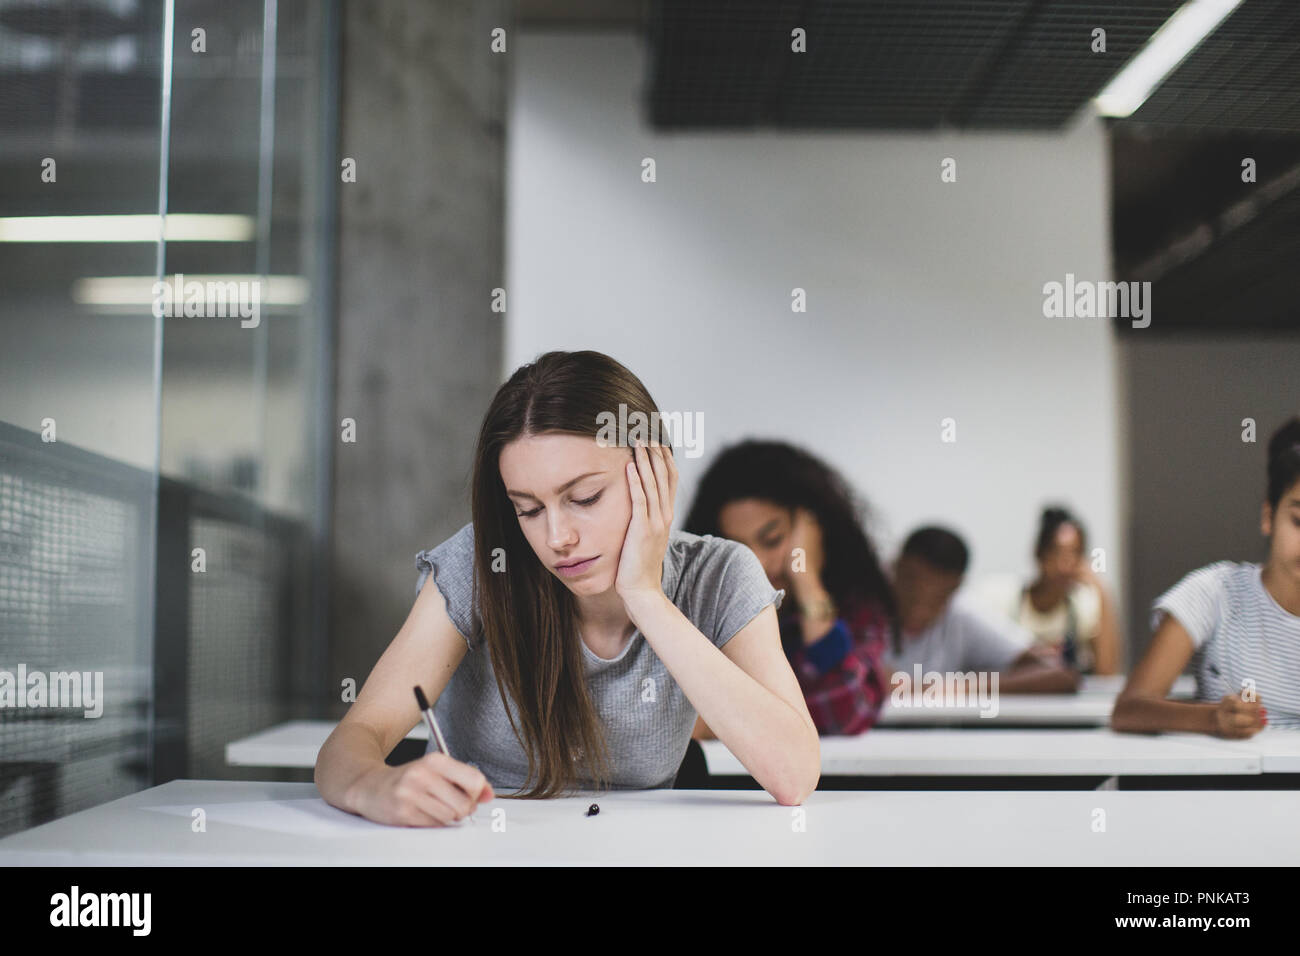 High school students in an exam Stock Photo